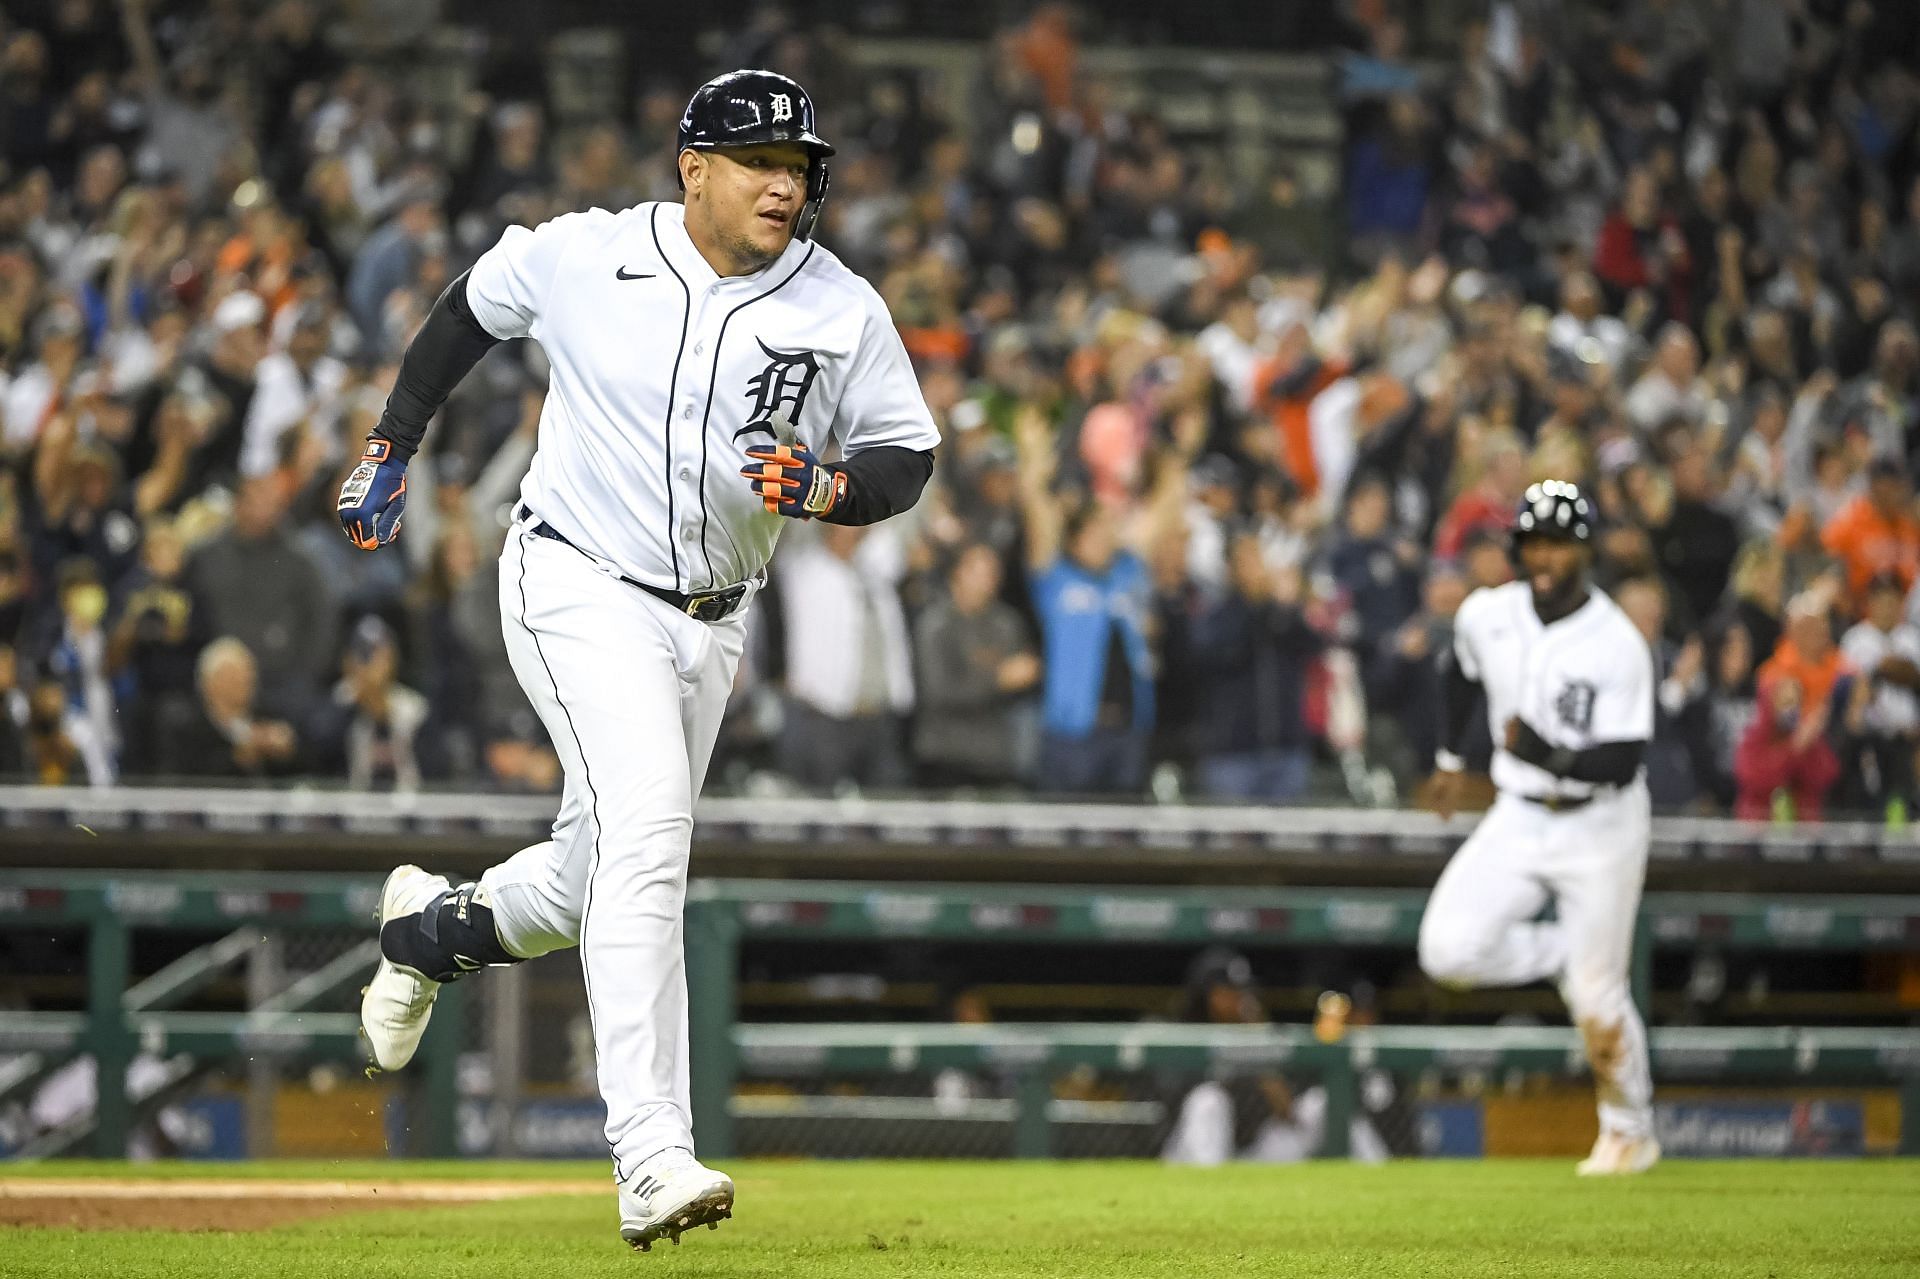 Cabrera runs to first base after hitting a base hit into right field against the Kansas City Royals. 